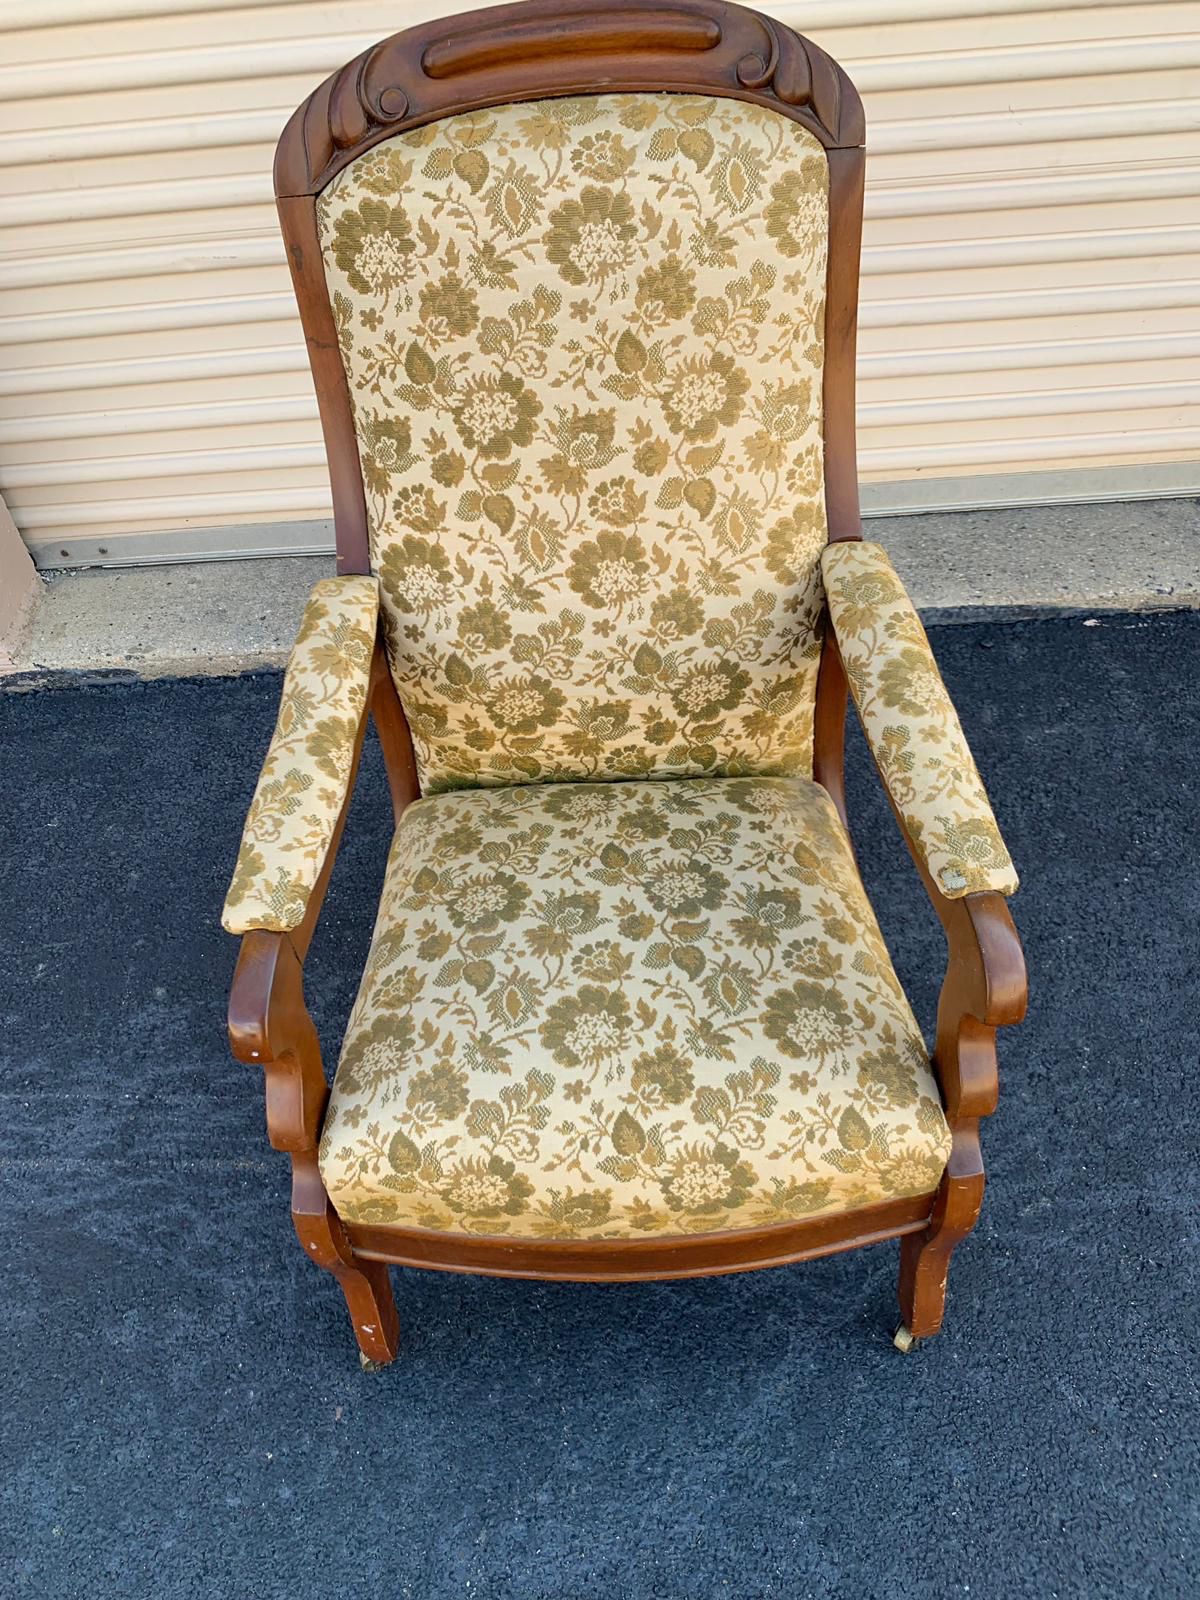 Antique rolling chair, very comfortable